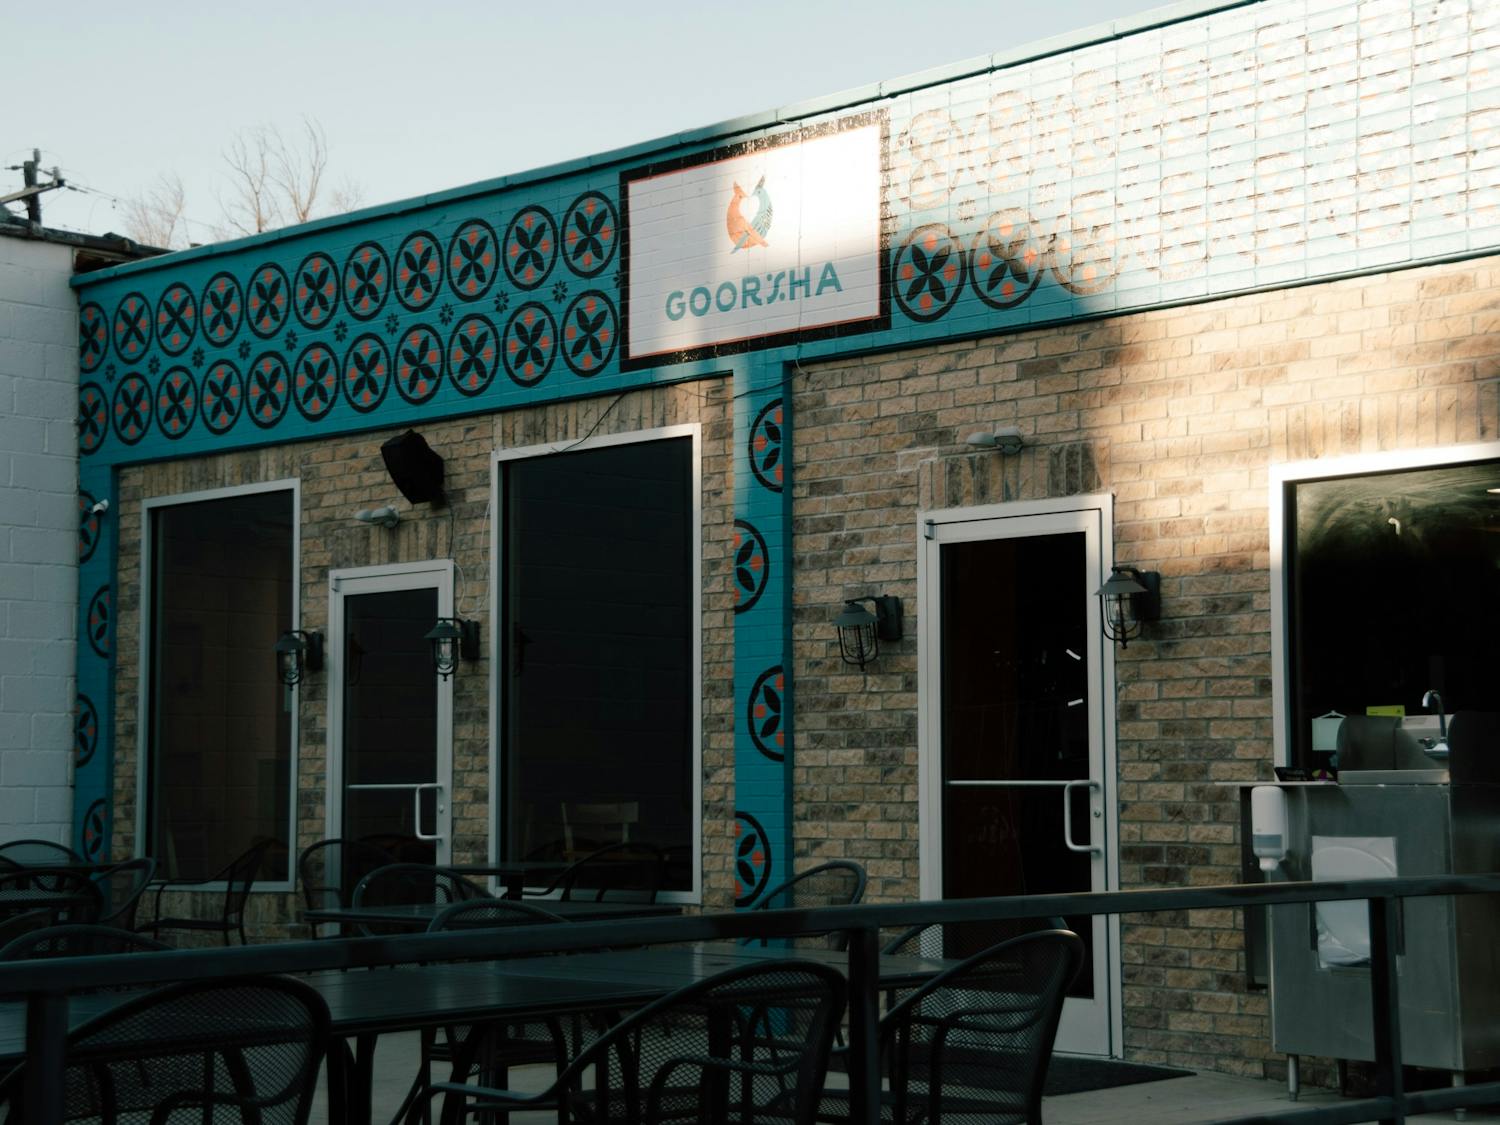 Local Ethiopian restaurant Goorsha has adapted to survive the COVID-19 pandemic, from turning to pick-up and delivery orders to turning a group event space into a cafe.